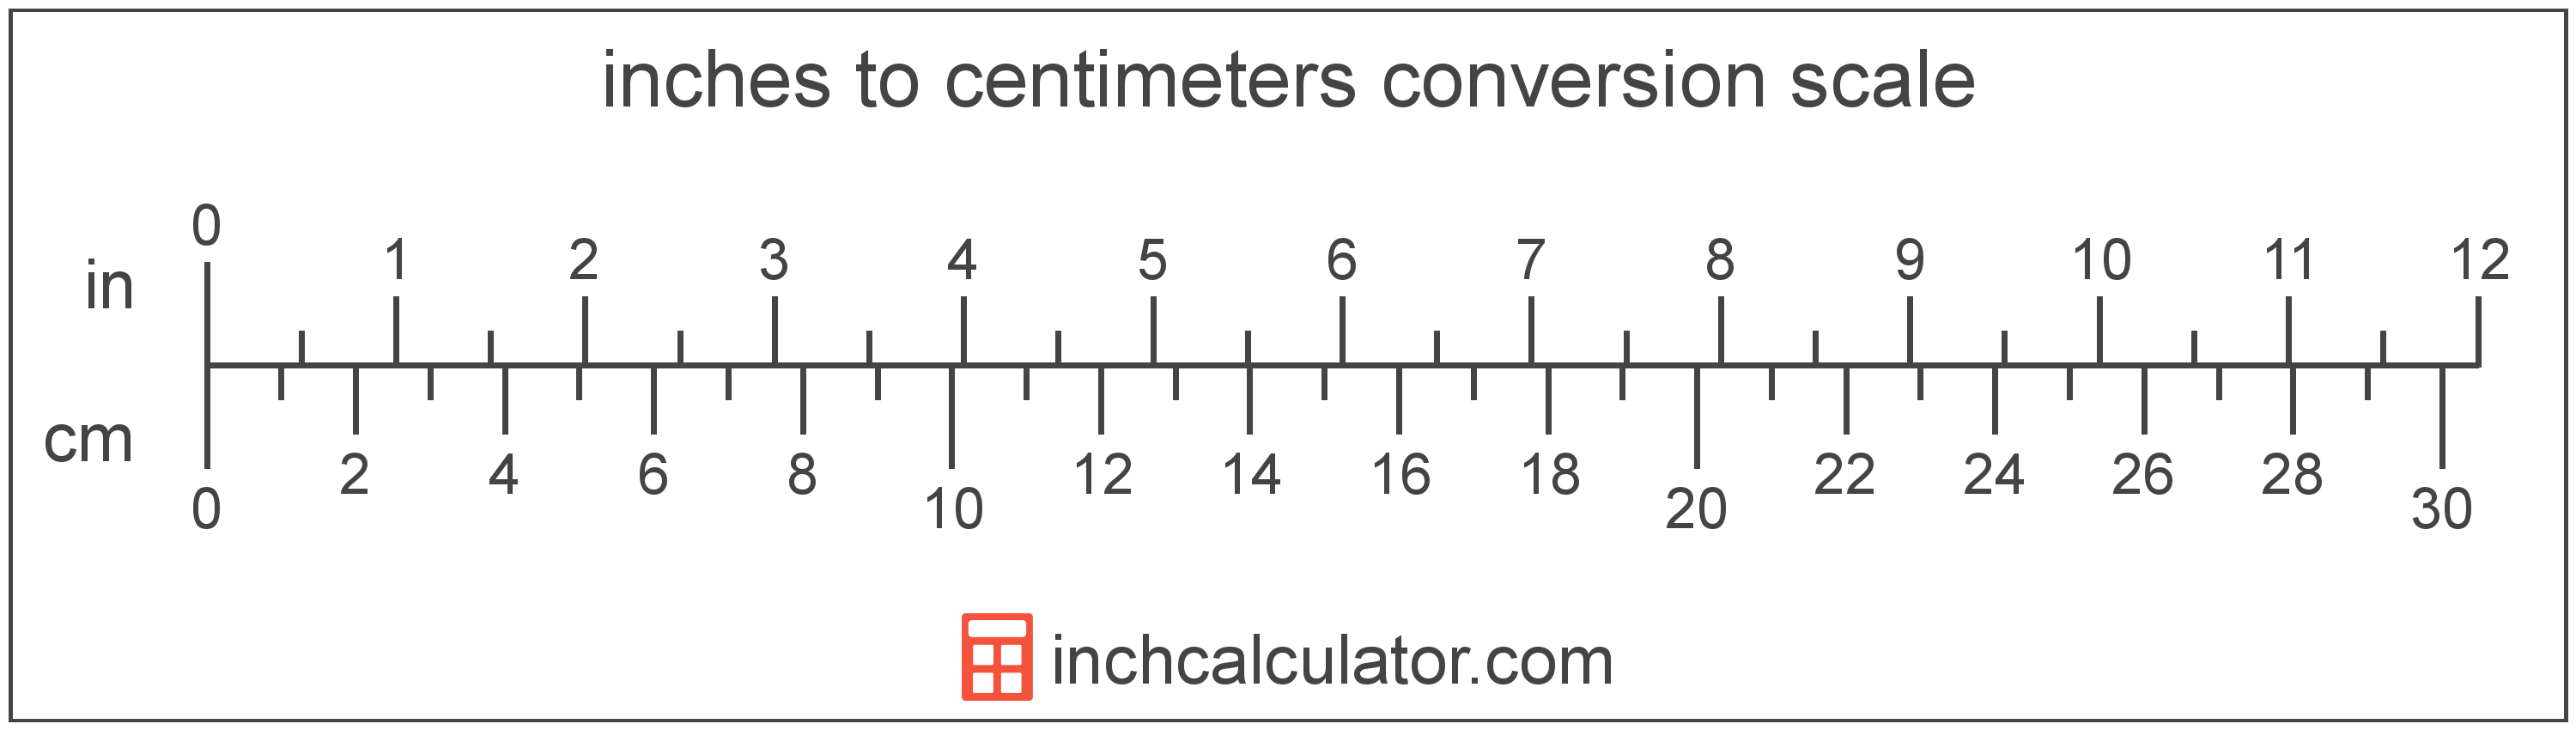 conversion scale showing centimeters and equivalent inches length values